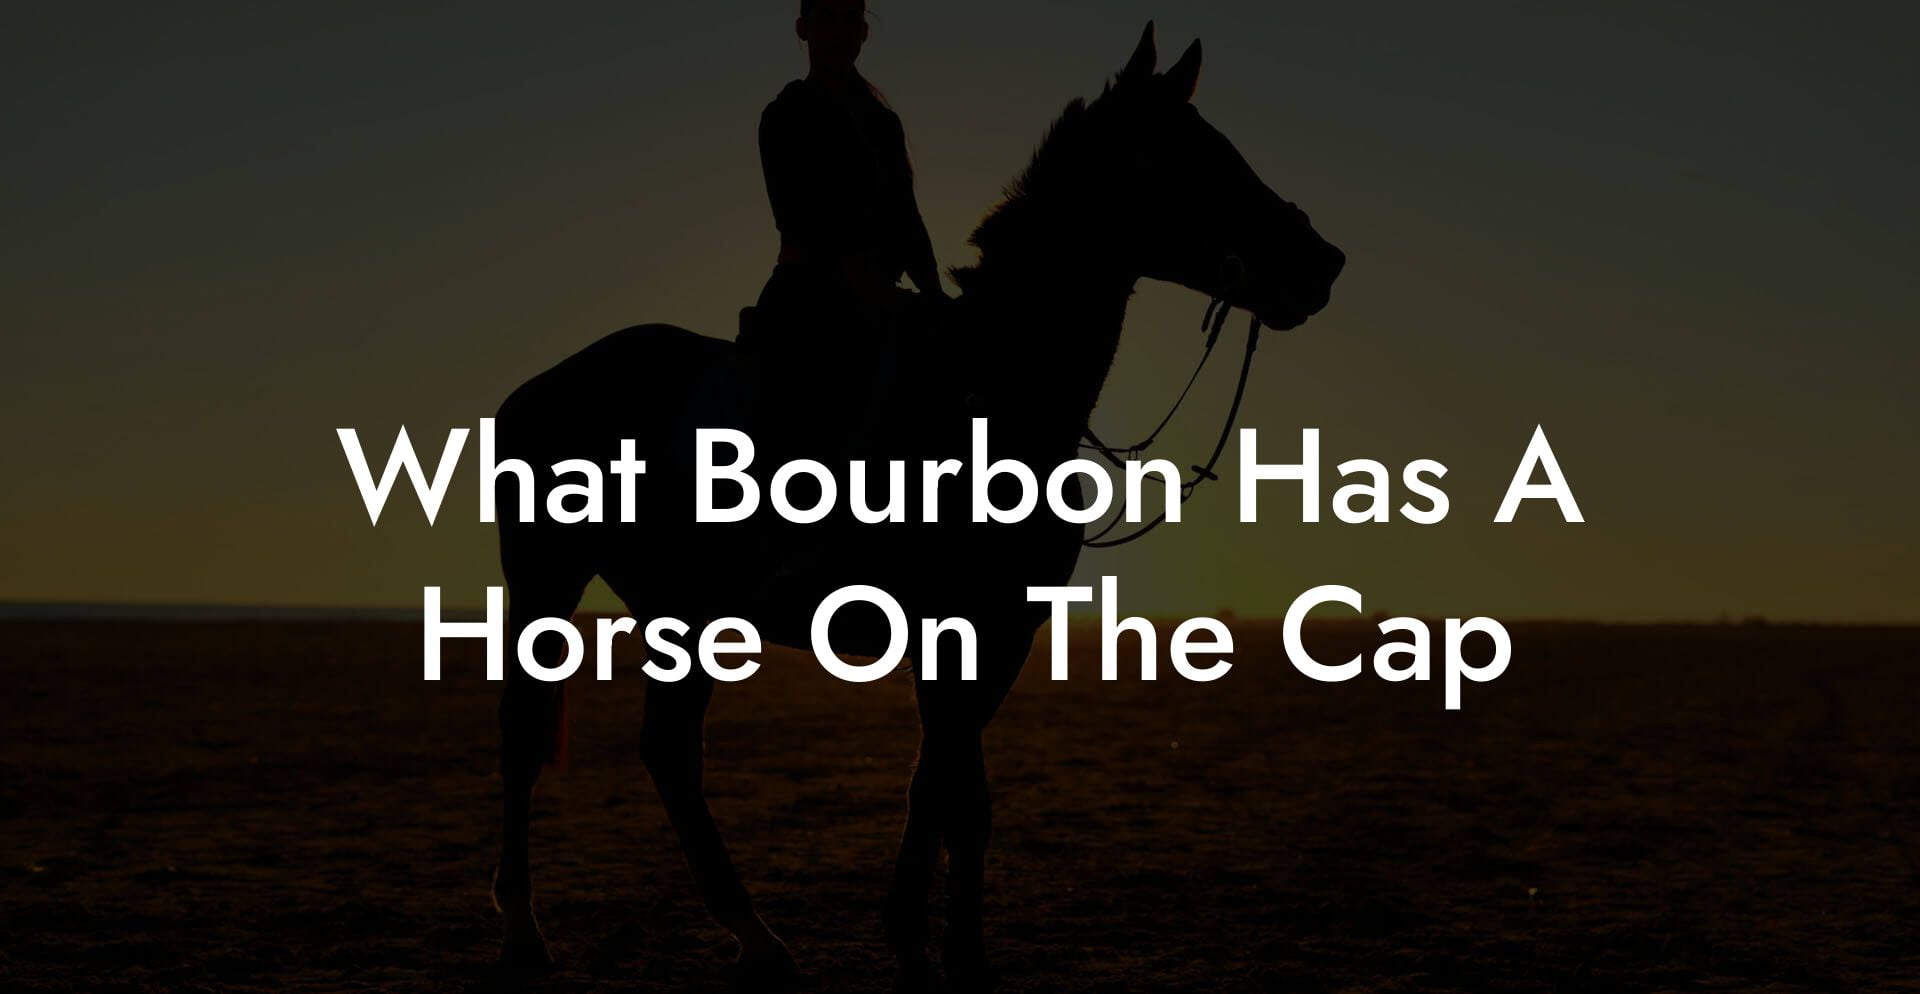 What Bourbon Has A Horse On The Cap